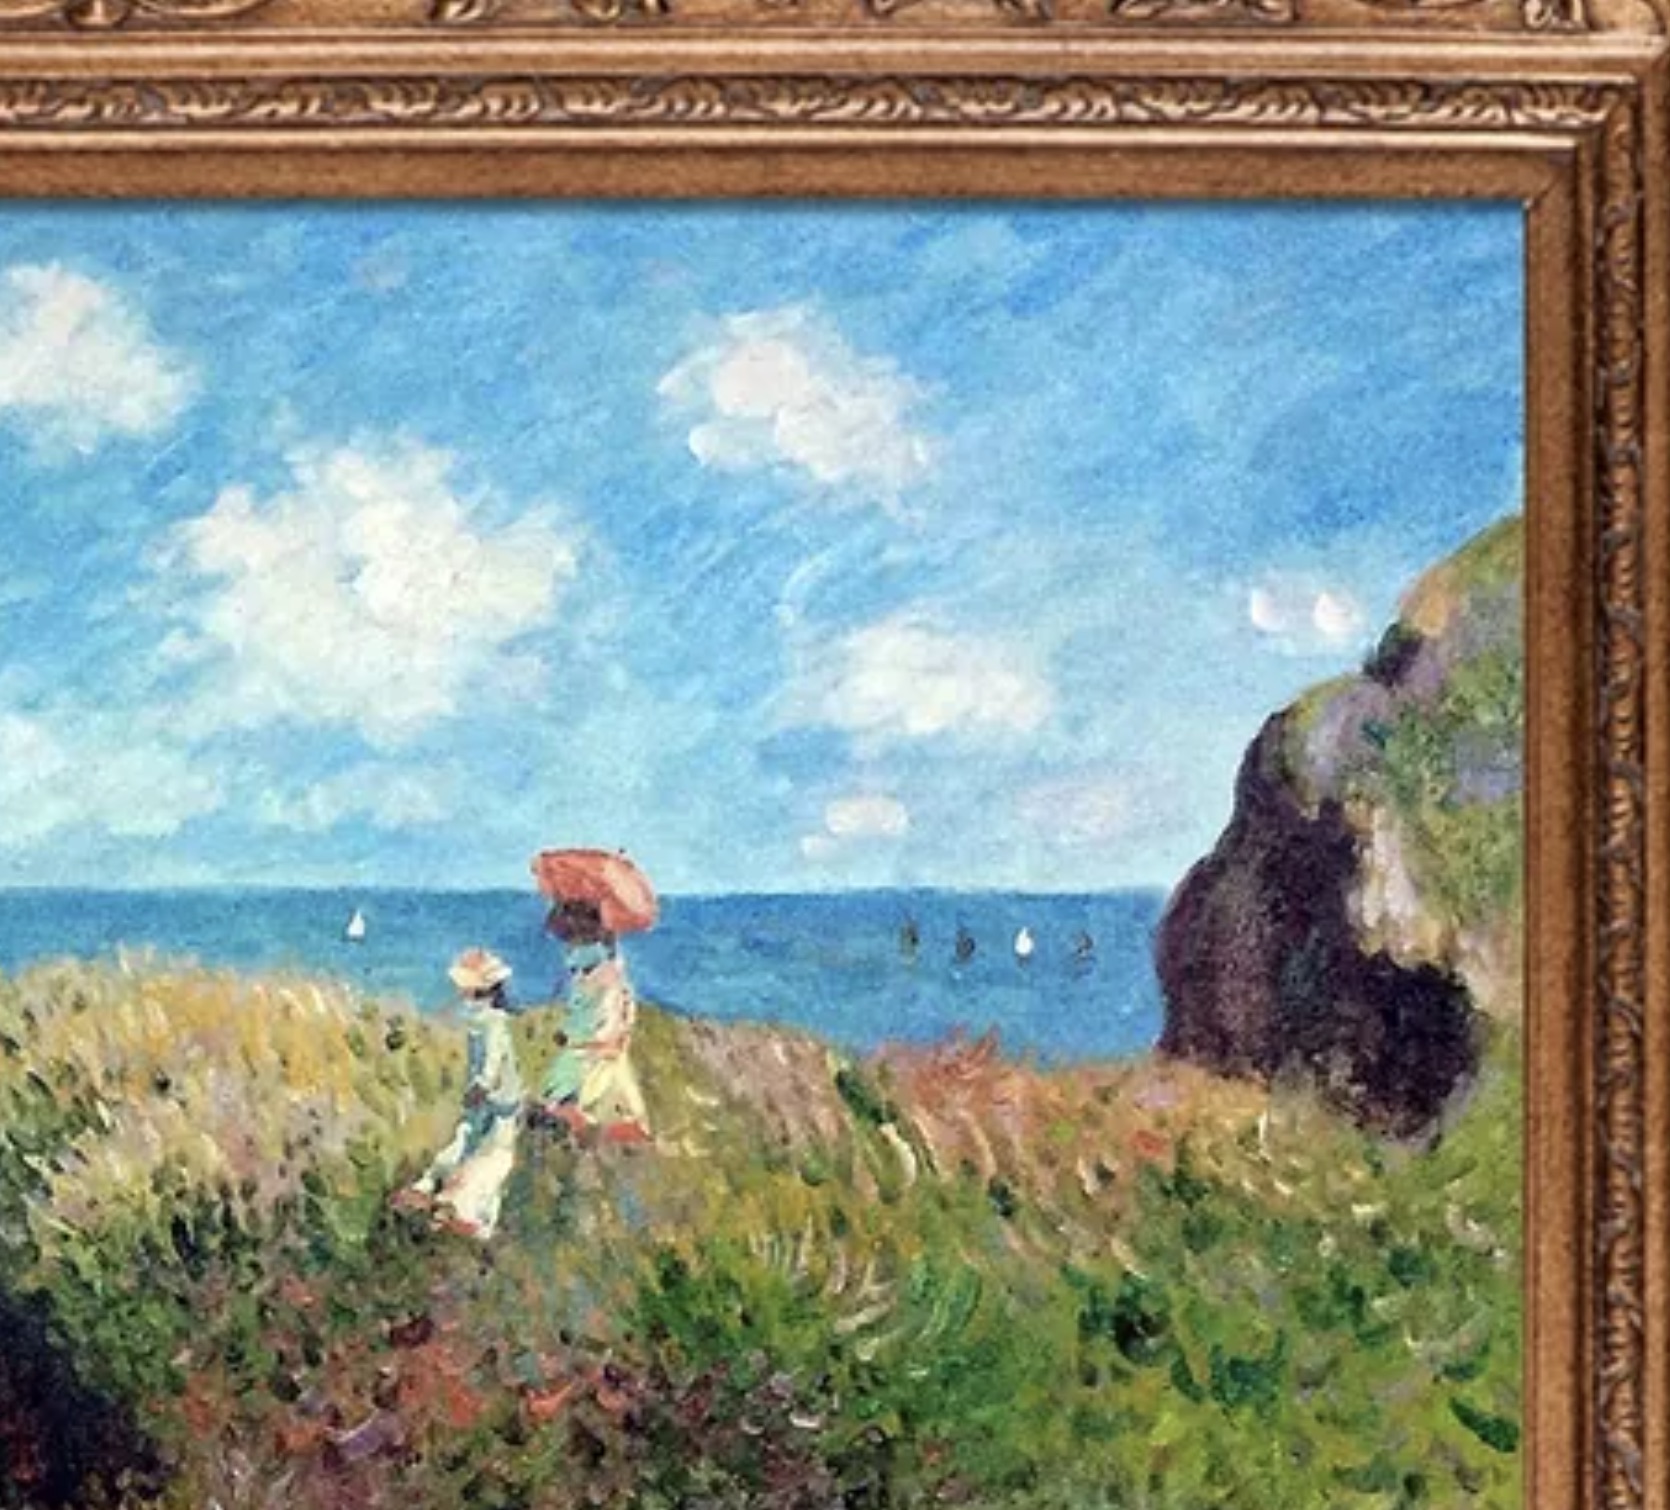 Claude Monet "Cliff Walk at Porville, 1882" Oil Painting, After - Image 4 of 6